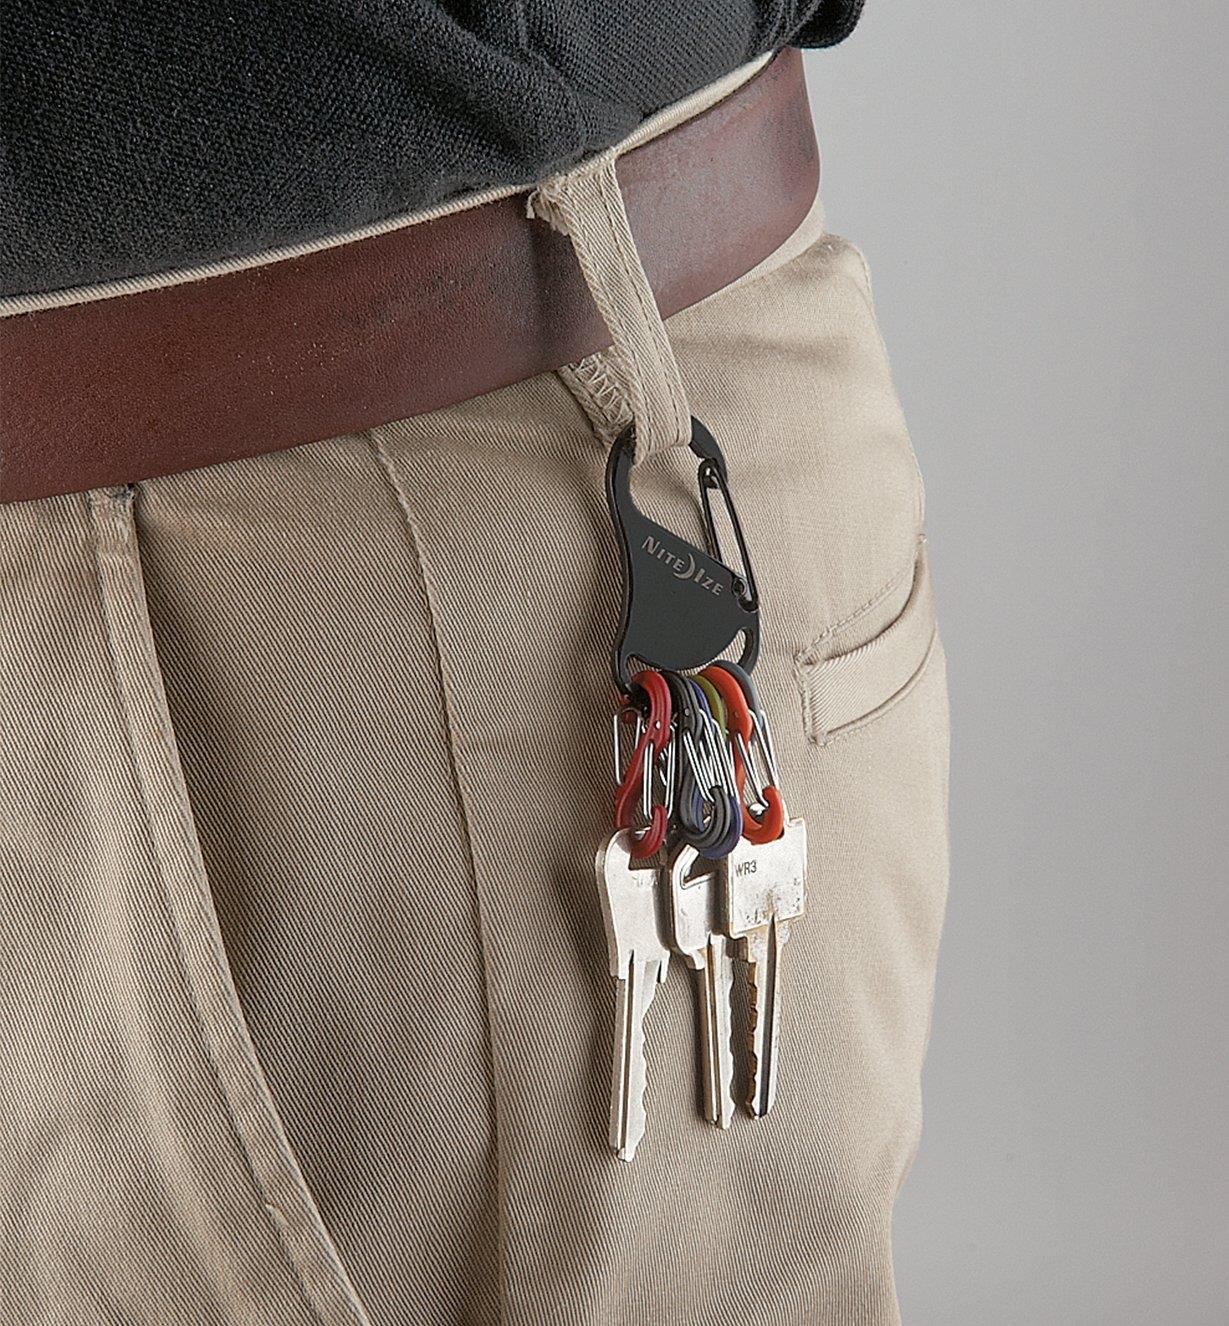 Color-Coded Key Carrier attached to a belt loop